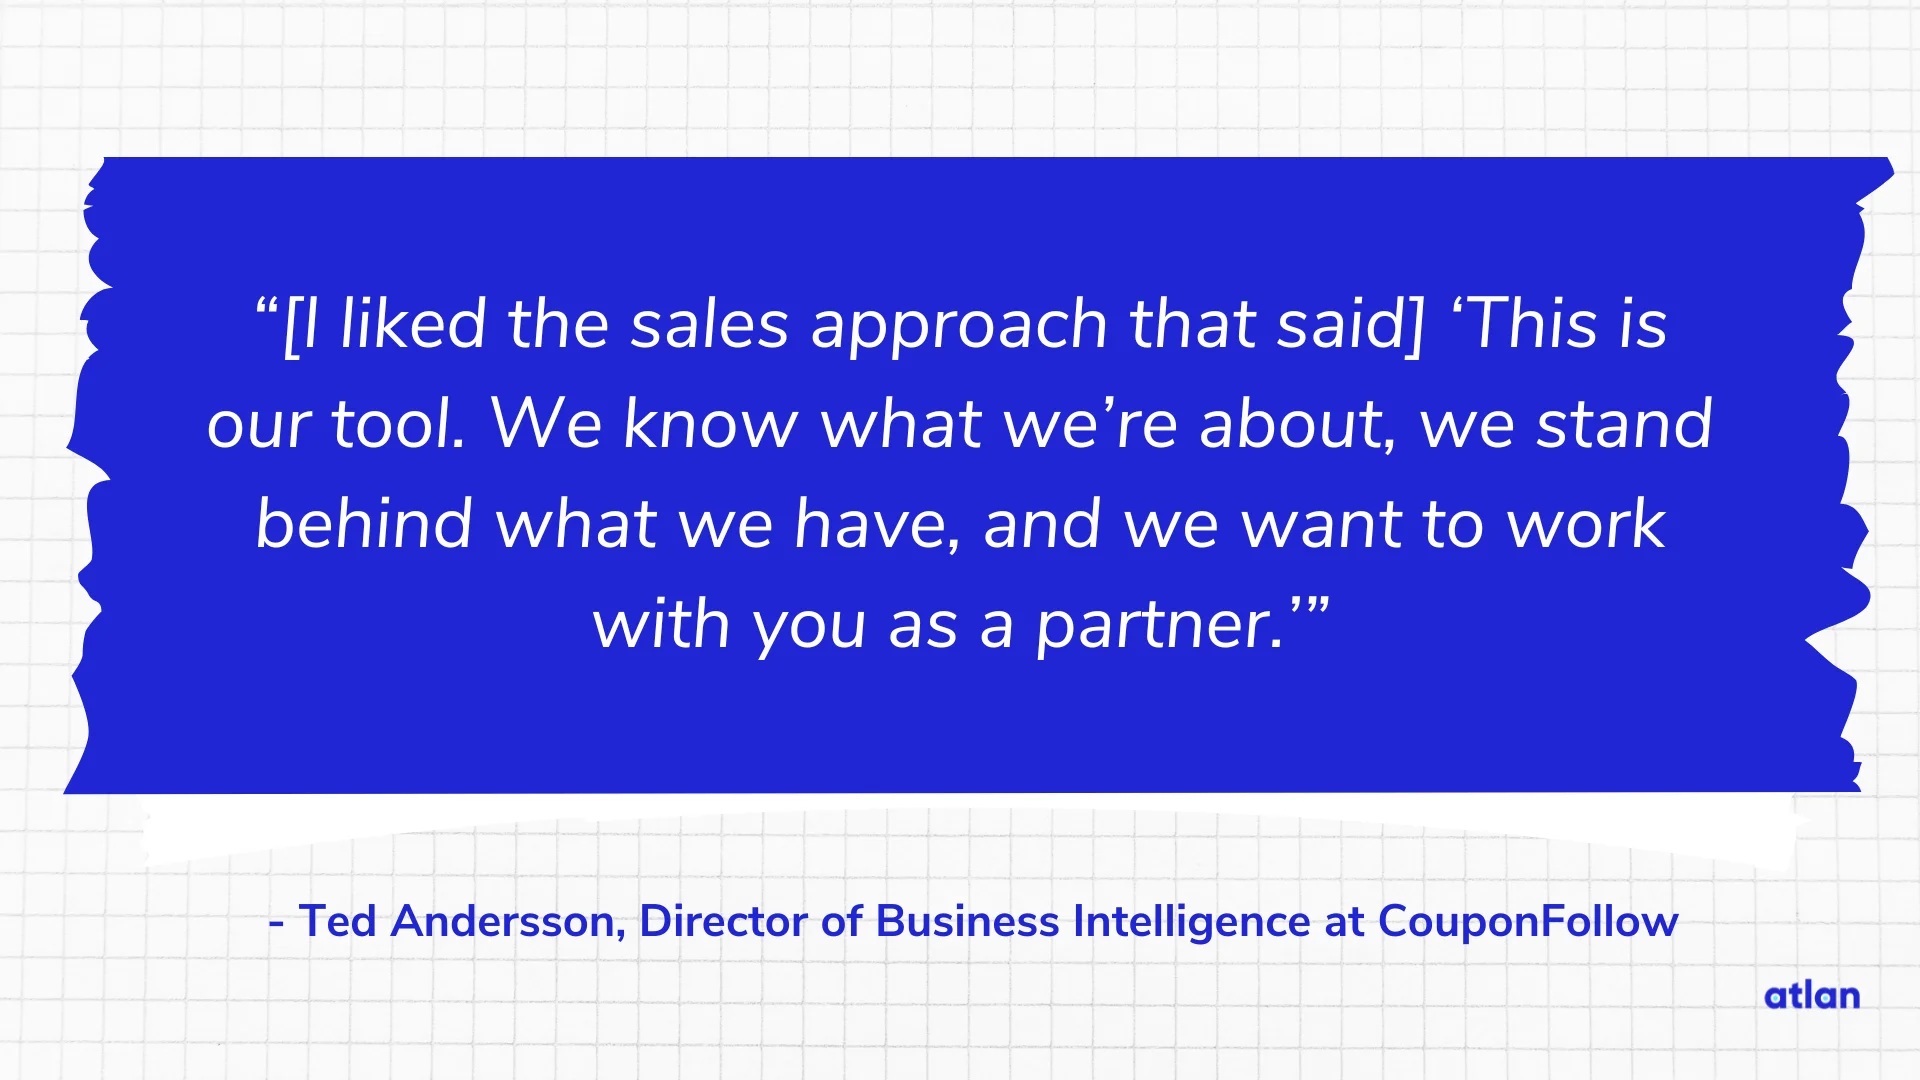 Ted Andersson, Director of Business Intelligence at CouponFollow on how he preferred a partner-centric approach to cataloging